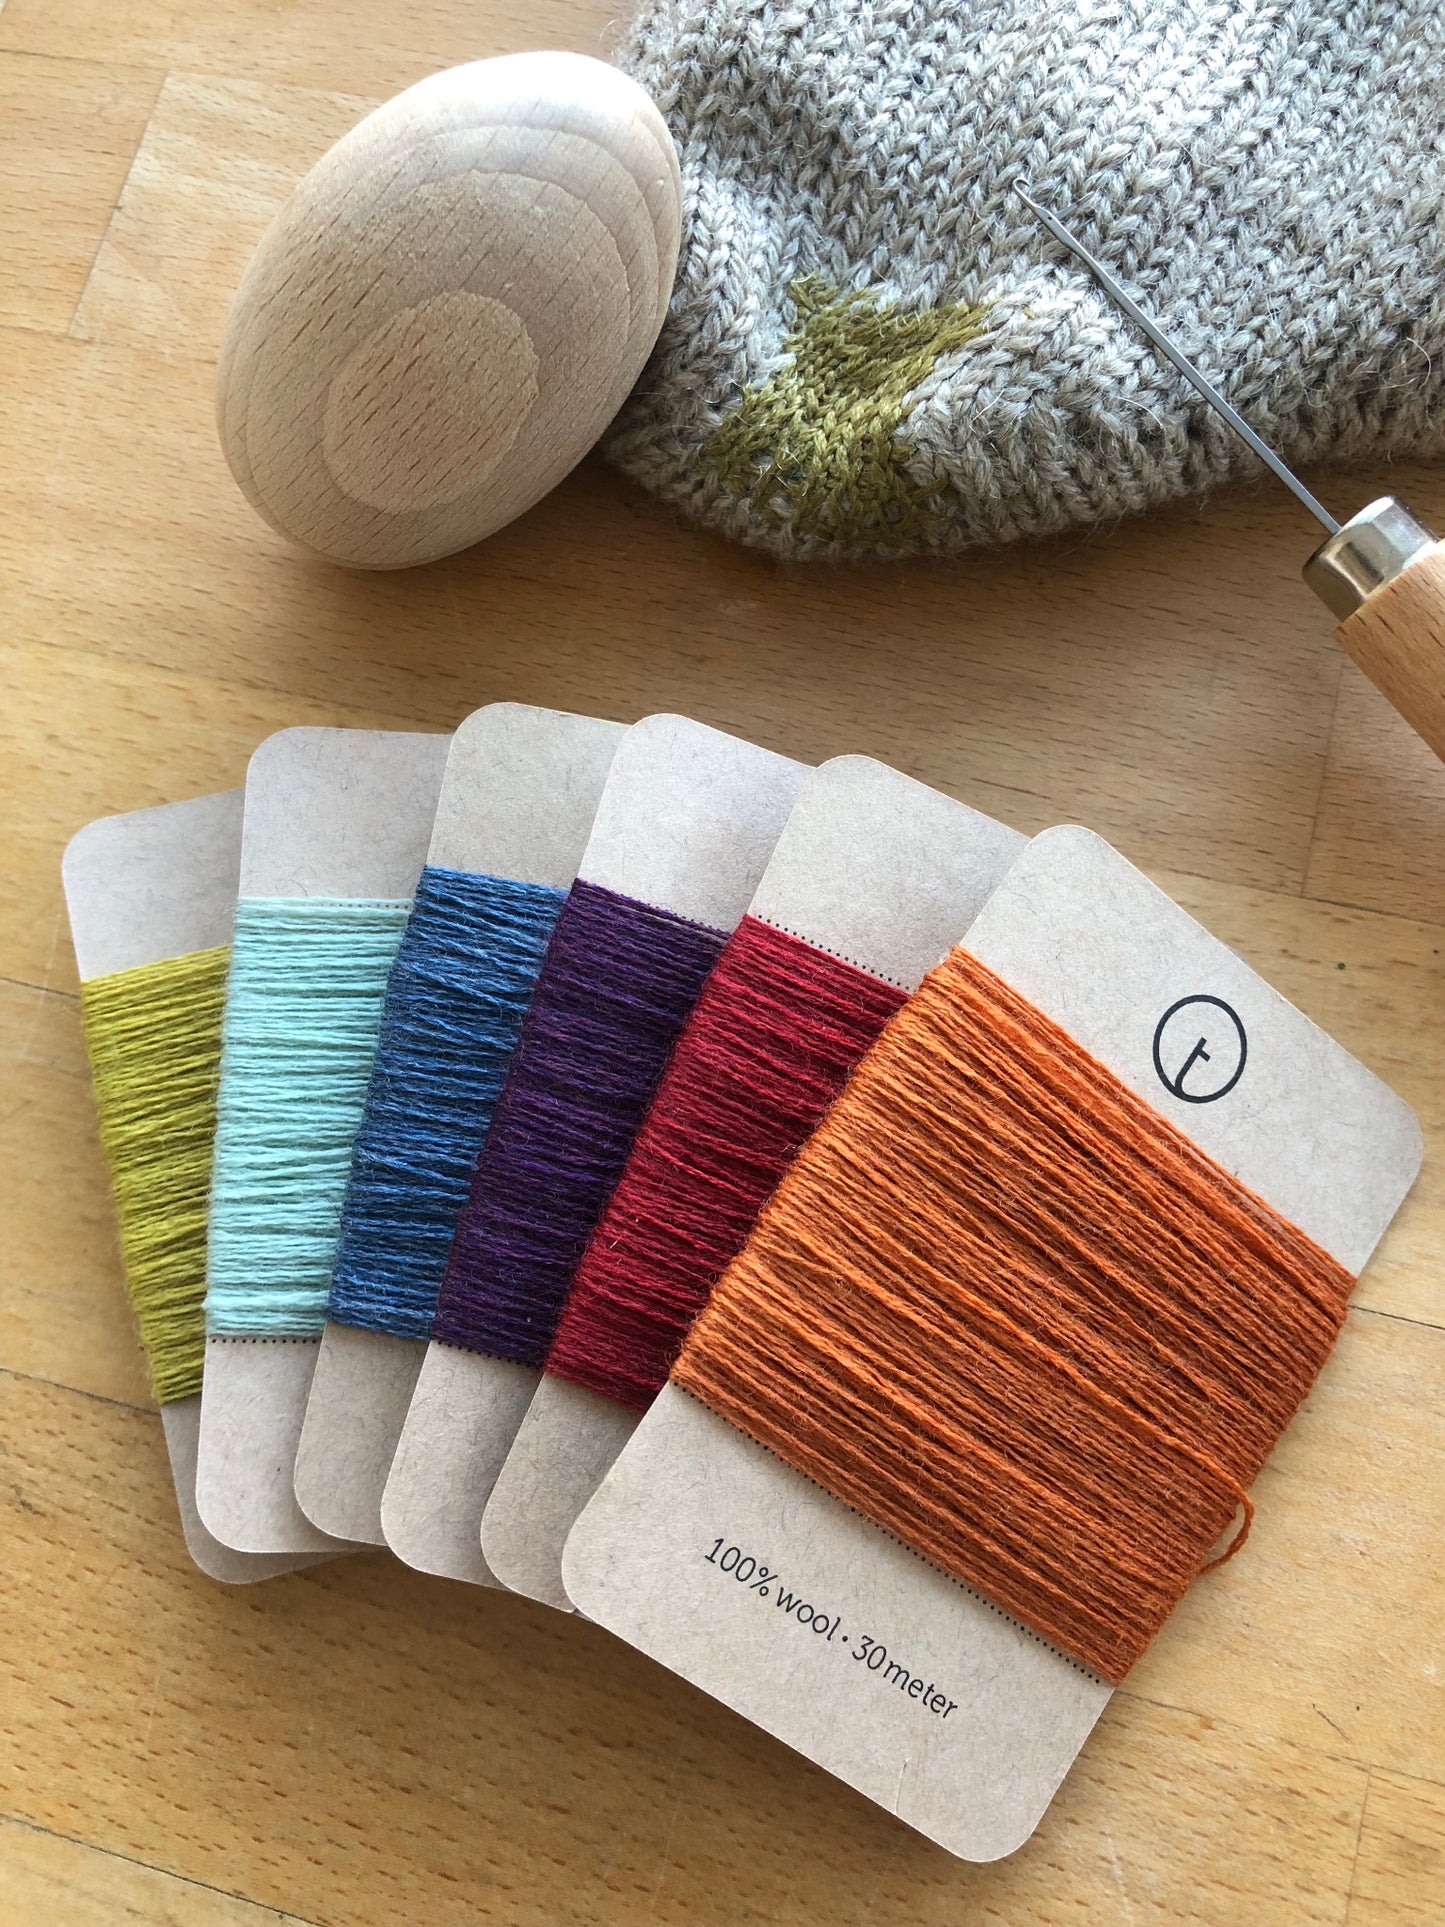 Repair your wool garment with toolly's wool 100% darning yarn